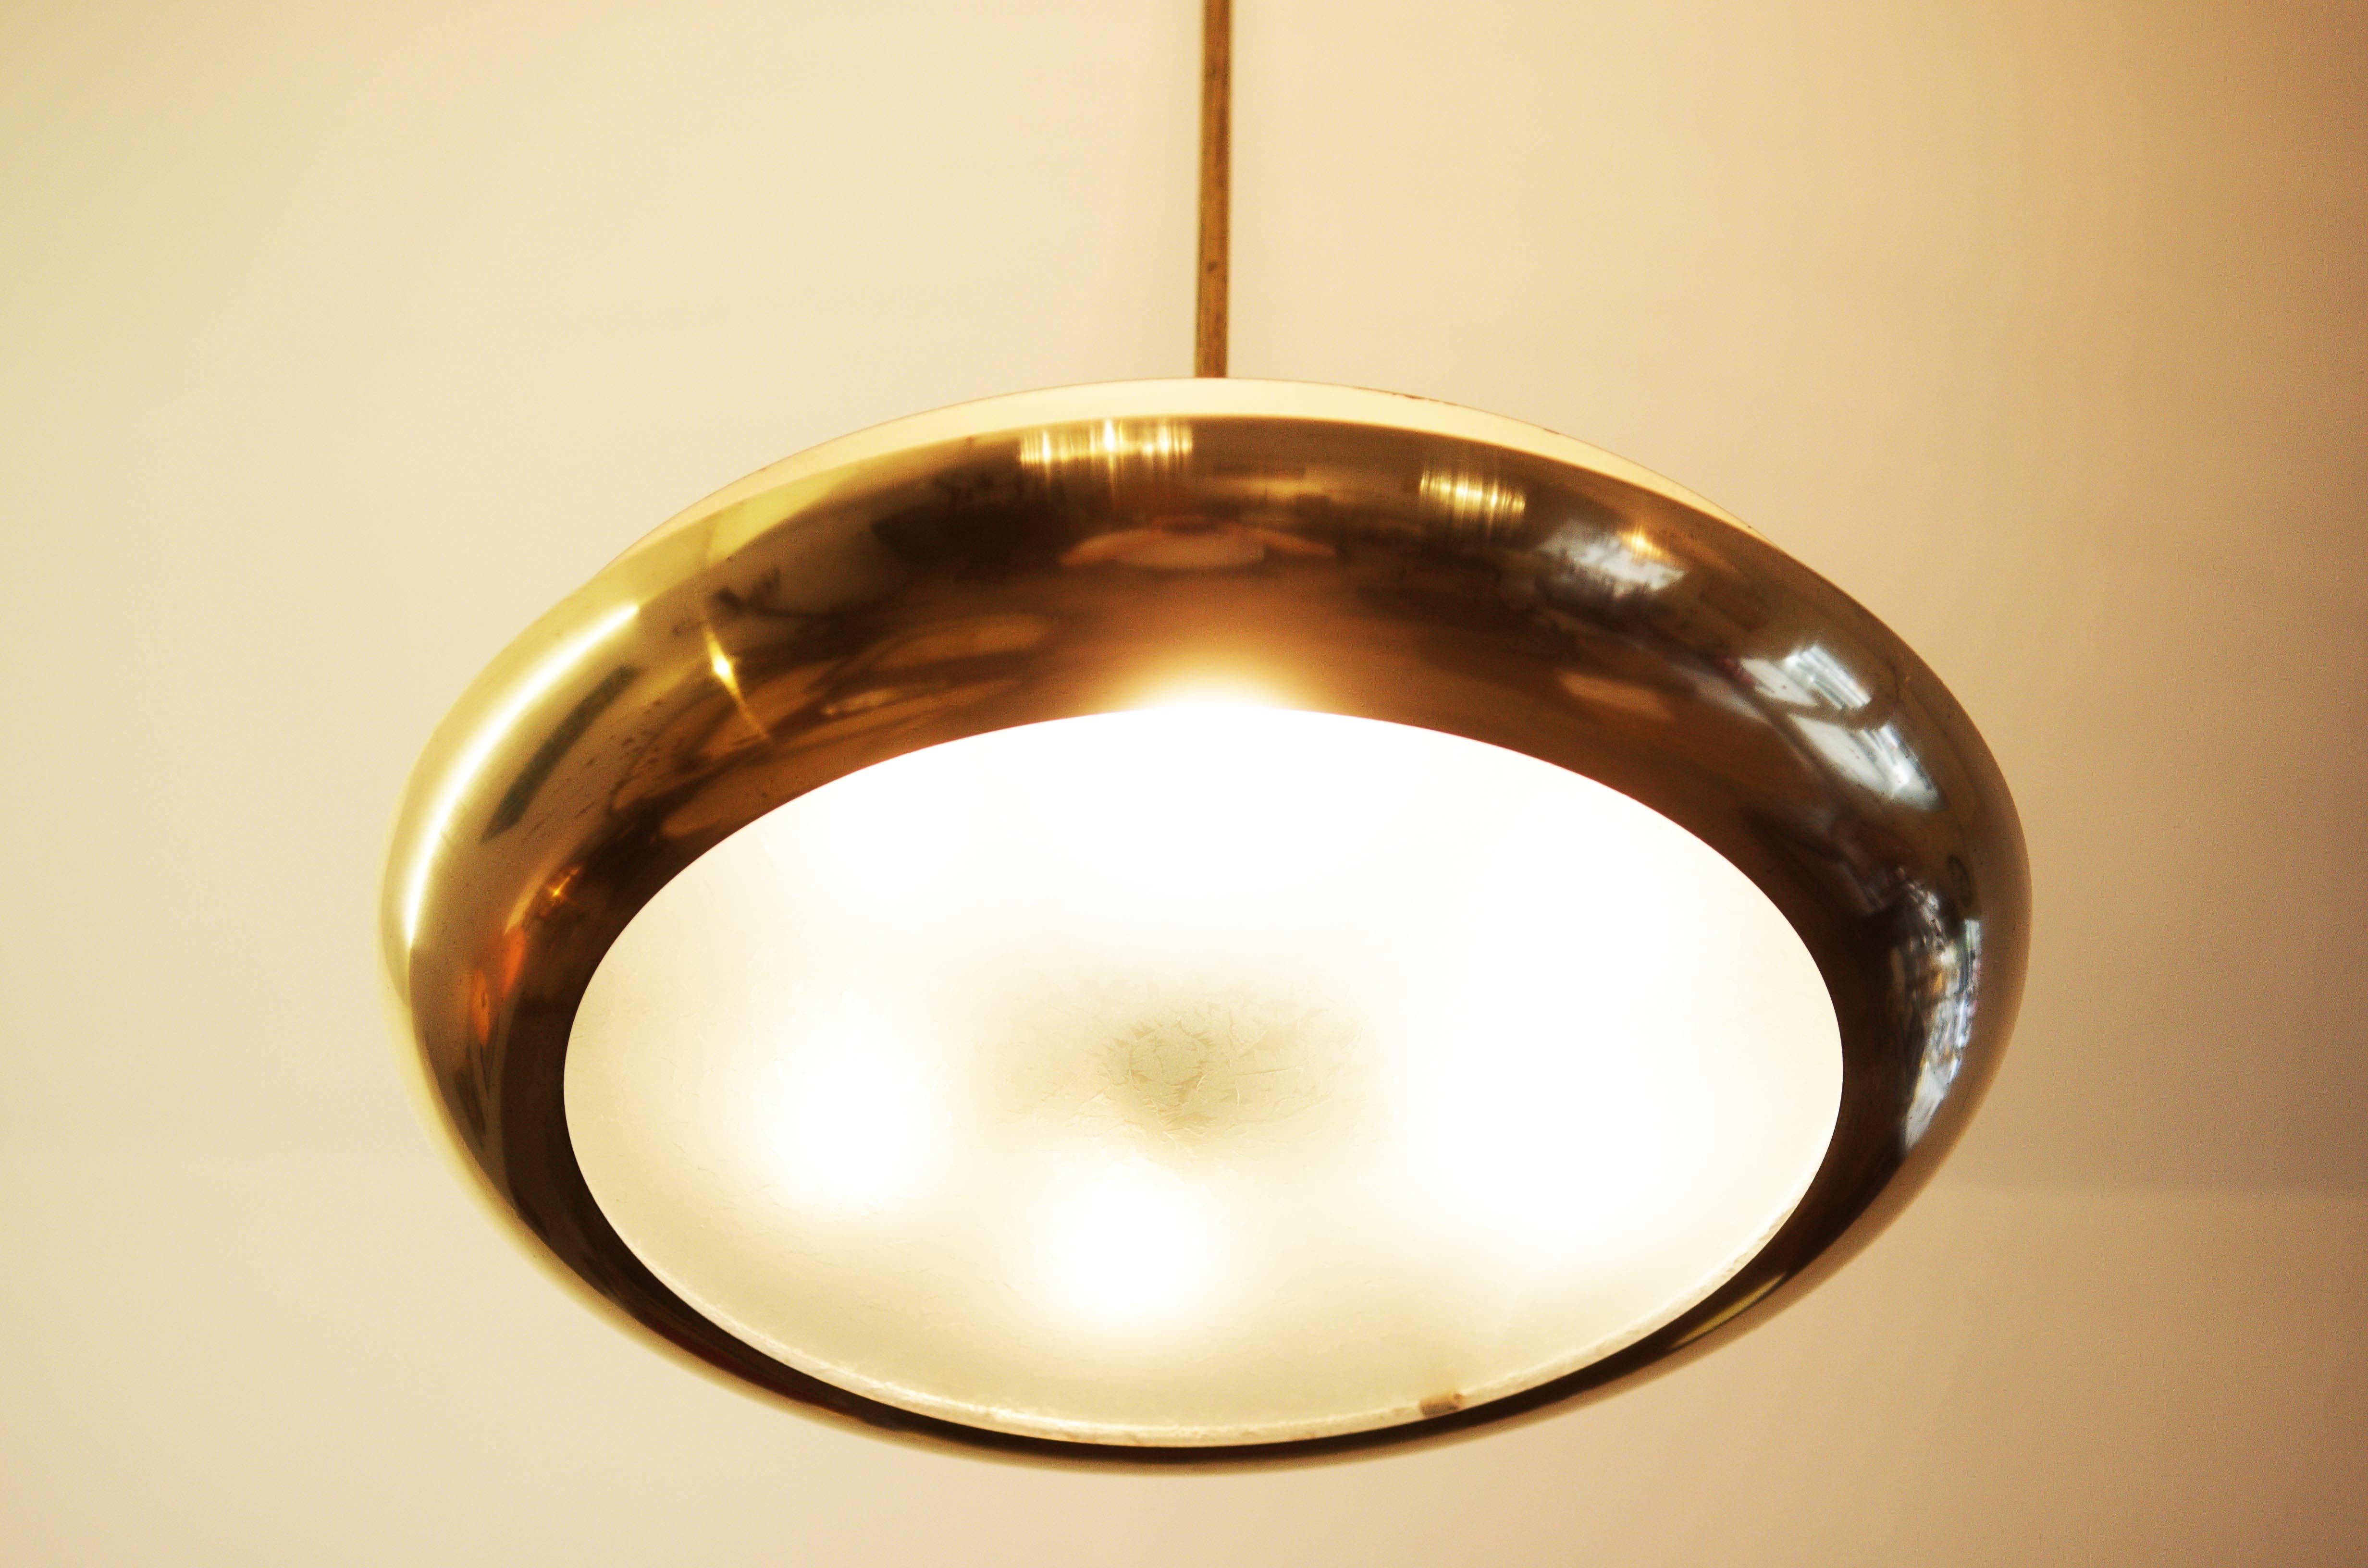 Bauhaus pendant from about 1930s by Josef Hurka for Napako.
Brass construction, the lamp holds six bakelite E27 sockets,
restored, new electric.
Dimention: Diameneter: 52cm (20.57in).
The total length is now about 75cm (29.52in) can also provide